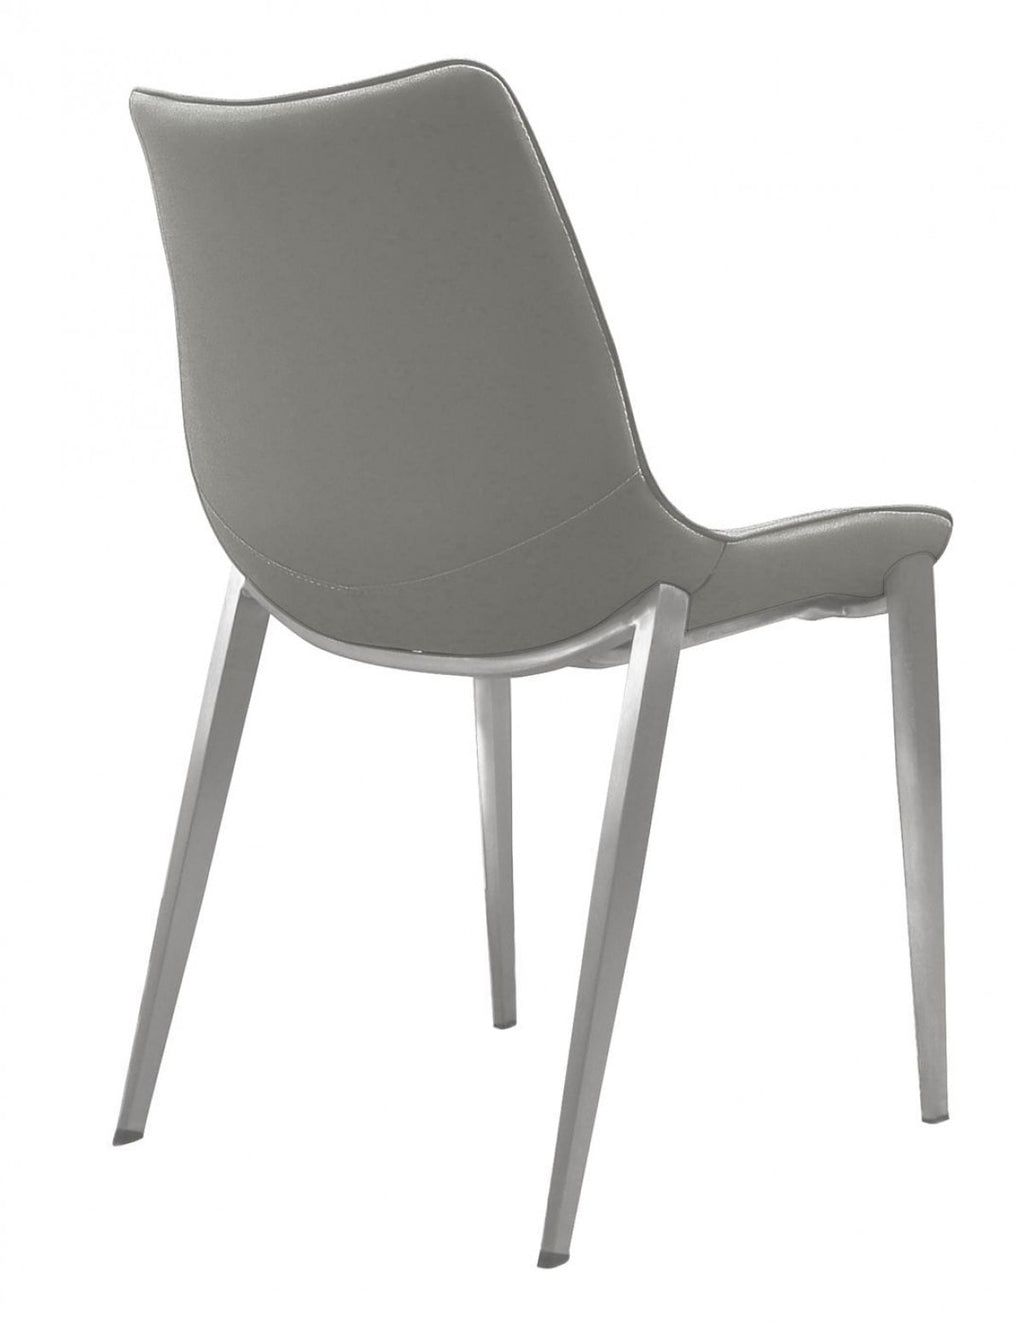 Set of Two Gray Faux Leather Modern Dining Chairs - 99fab 